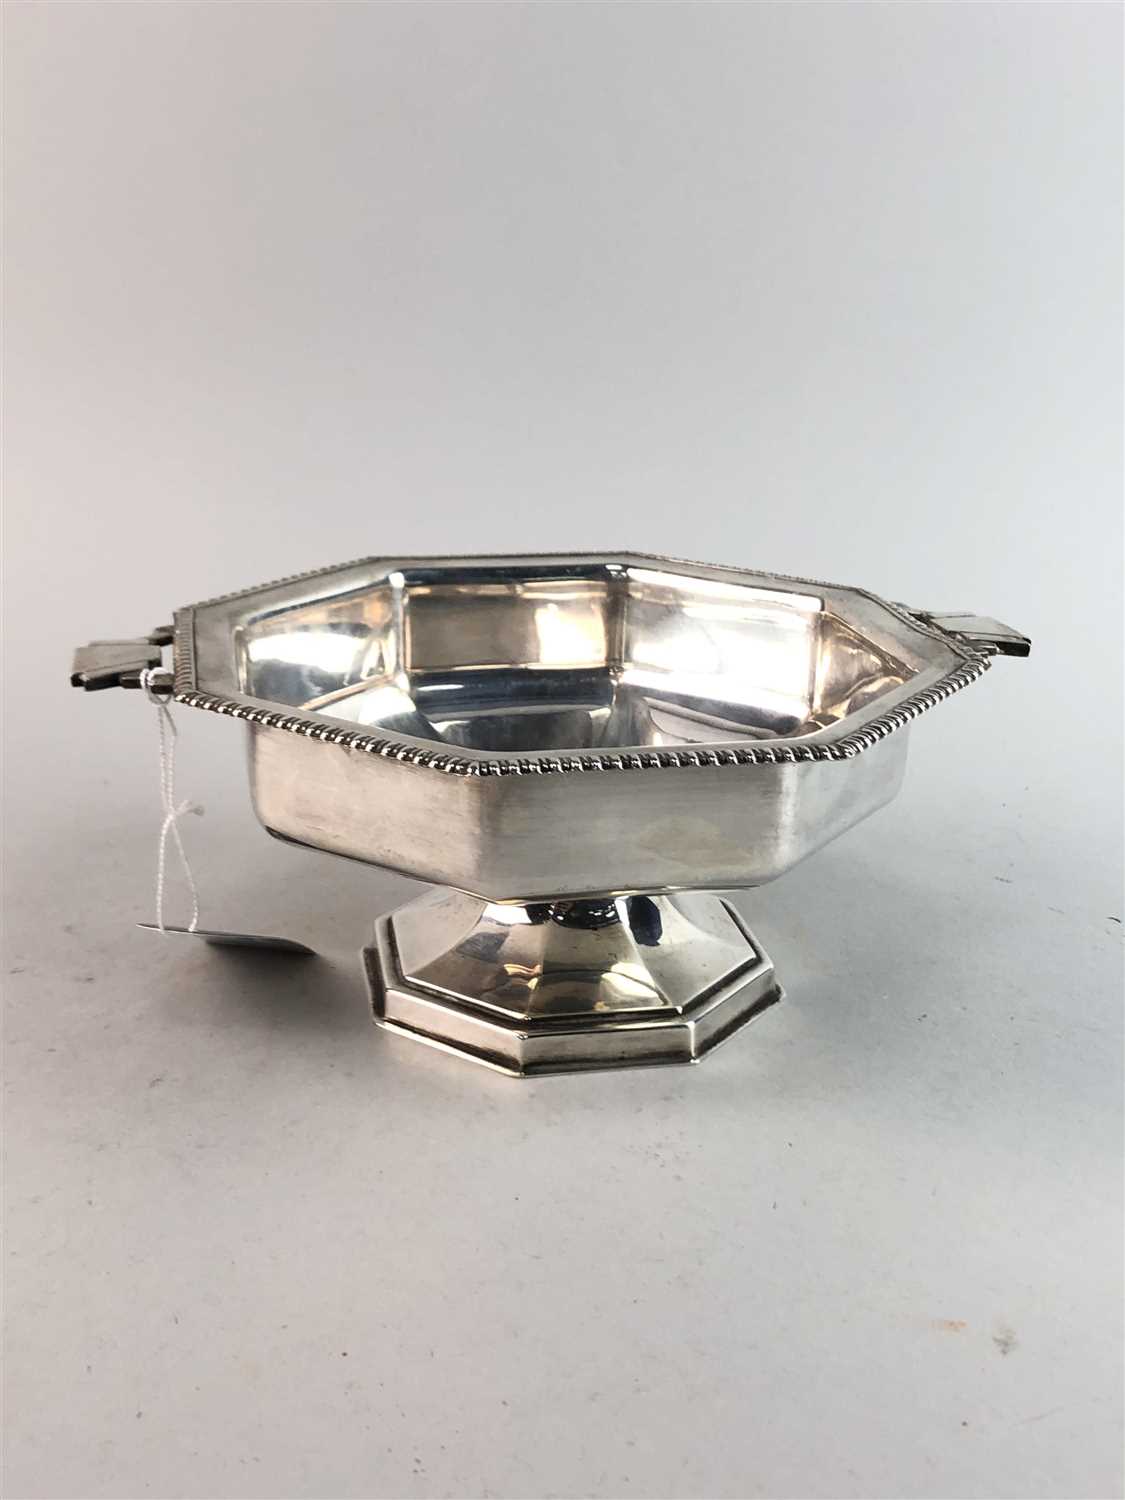 Lot 94 - A WALKER & HALL SILVER PLATED CENTREPIECE, DECANTER AND FISH DISH